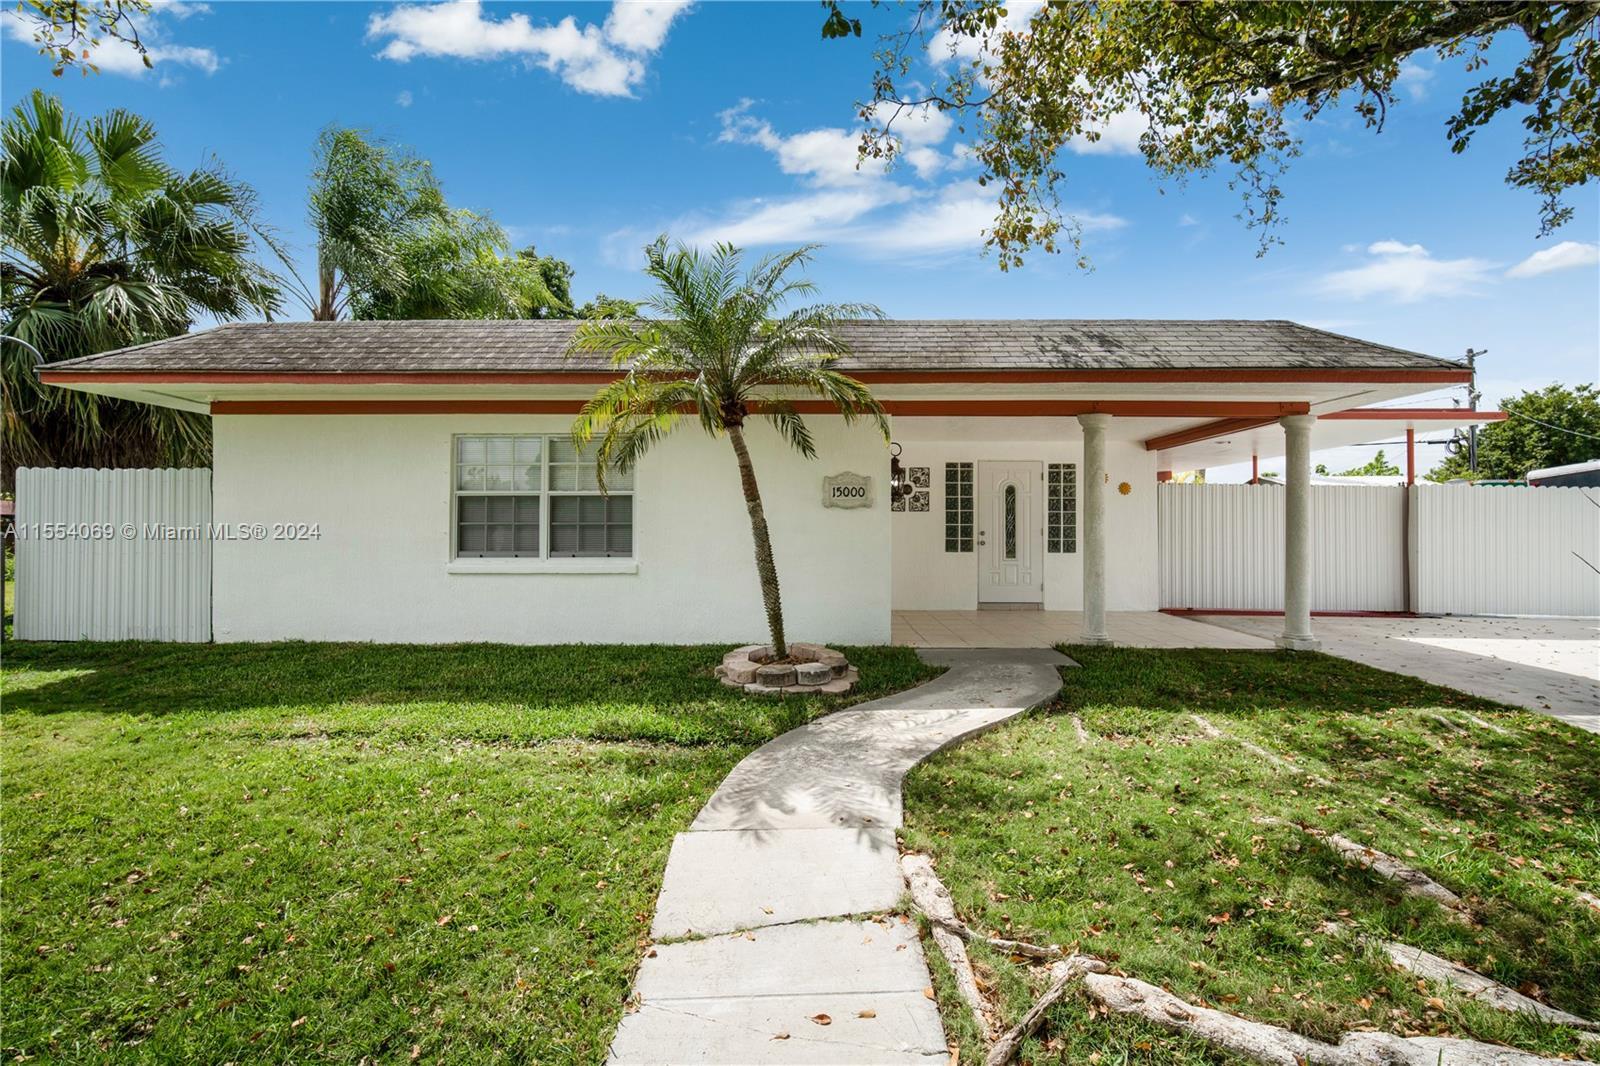 Photo of 15000 Leisure Dr in Homestead, FL